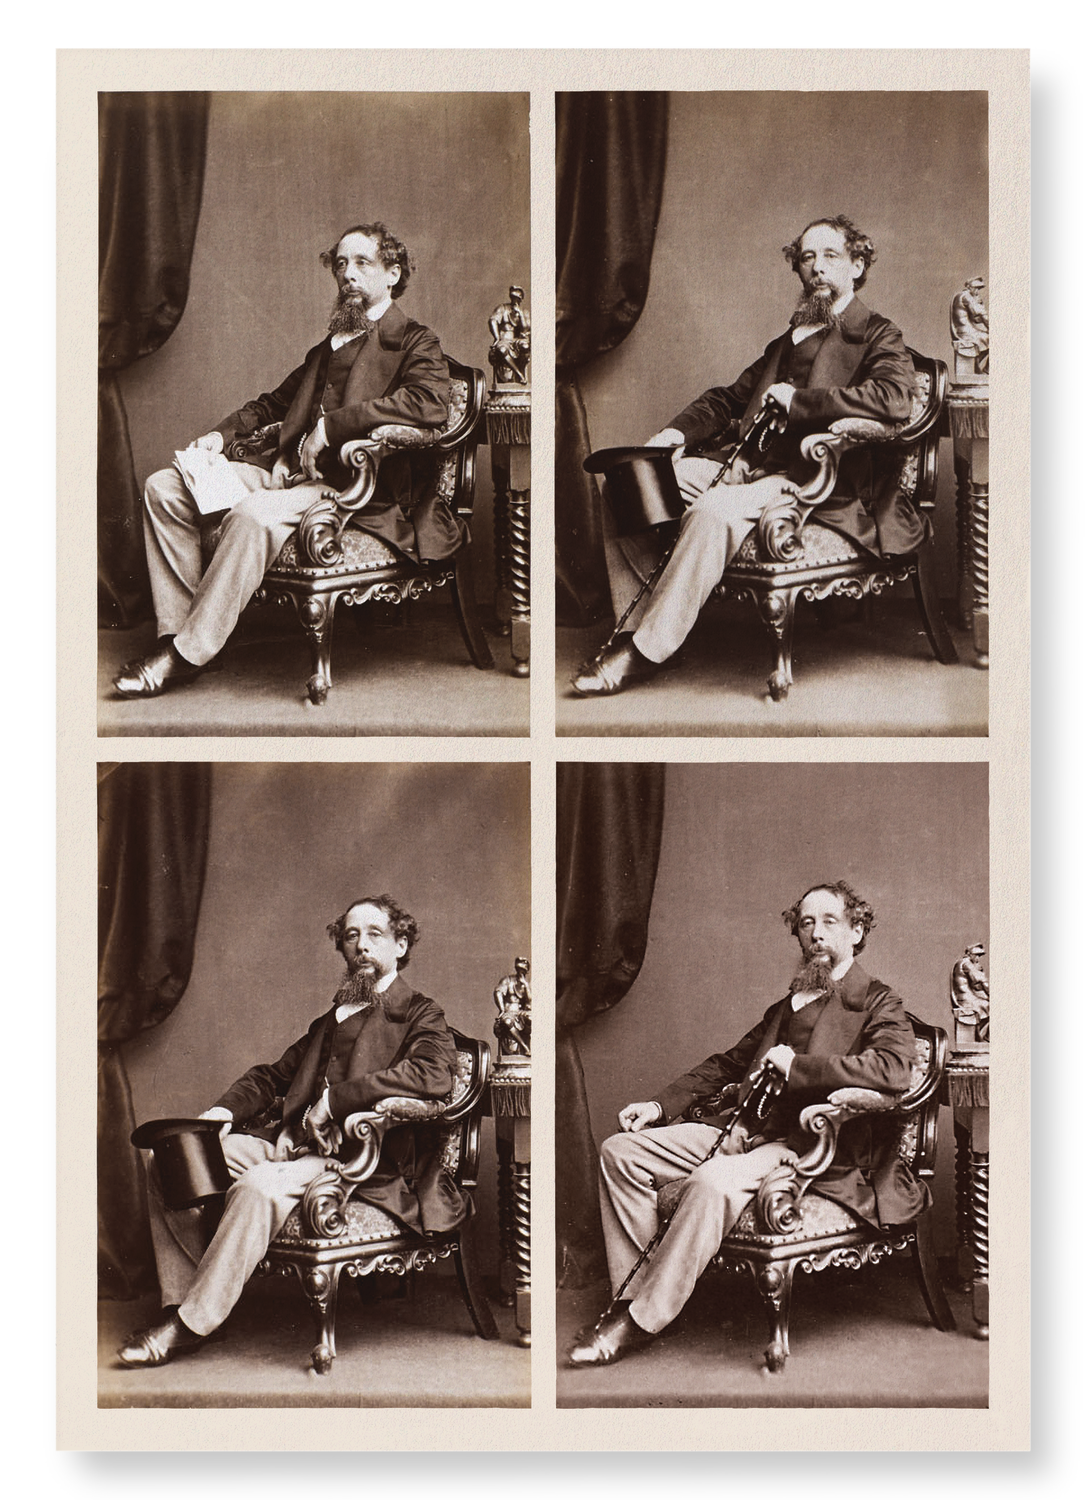 PHOTOGRAPHS OF CHARLES DICKENS: SET A (1858)